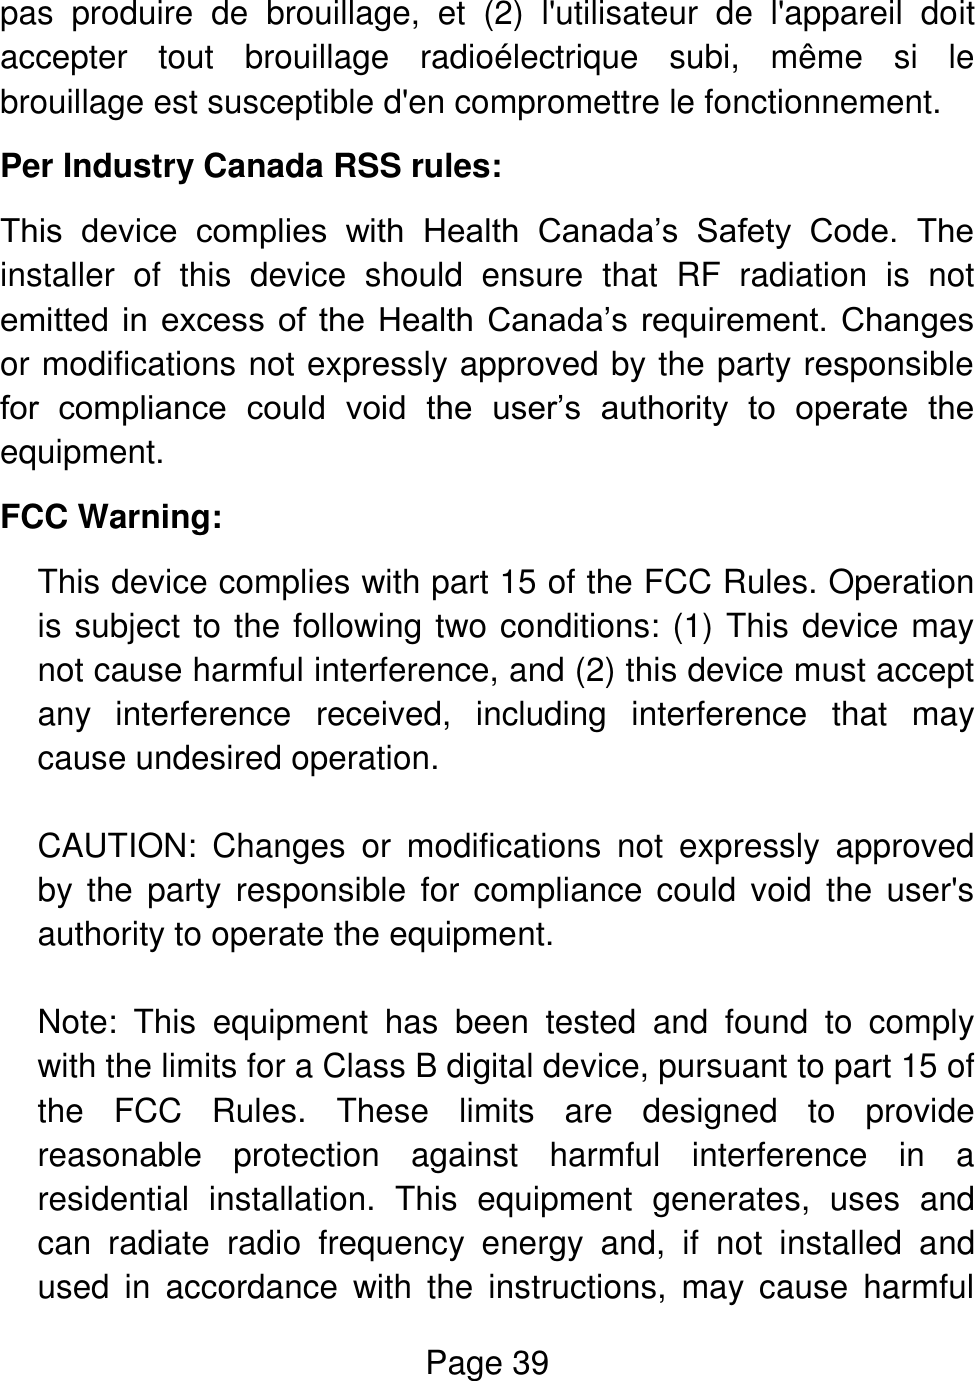 Page 39  pas  produire  de  brouillage,  et  (2)  l&apos;utilisateur  de  l&apos;appareil  doit accepter  tout  brouillage  radioélectrique  subi,  même  si  le brouillage est susceptible d&apos;en compromettre le fonctionnement. Per Industry Canada RSS rules: This  device  complies  with  Health  Canada’s  Safety  Code.  The installer  of  this  device  should  ensure  that  RF  radiation  is  not emitted  in  excess  of  the  Health  Canada’s requirement.  Changes or modifications not expressly approved by the party responsible for  compliance  could  void  the  user’s  authority  to  operate  the equipment. FCC Warning: This device complies with part 15 of the FCC Rules. Operation is subject to the following two conditions: (1) This device may not cause harmful interference, and (2) this device must accept any  interference  received,  including  interference  that  may cause undesired operation.  CAUTION:  Changes  or  modifications  not  expressly  approved by the party  responsible for compliance  could  void  the  user&apos;s authority to operate the equipment.  Note:  This  equipment  has  been  tested  and  found  to  comply with the limits for a Class B digital device, pursuant to part 15 of the  FCC  Rules.  These  limits  are  designed  to  provide reasonable  protection  against  harmful  interference  in  a residential  installation.  This  equipment  generates,  uses  and can  radiate  radio  frequency  energy  and,  if  not  installed  and used  in  accordance  with  the  instructions,  may  cause  harmful 